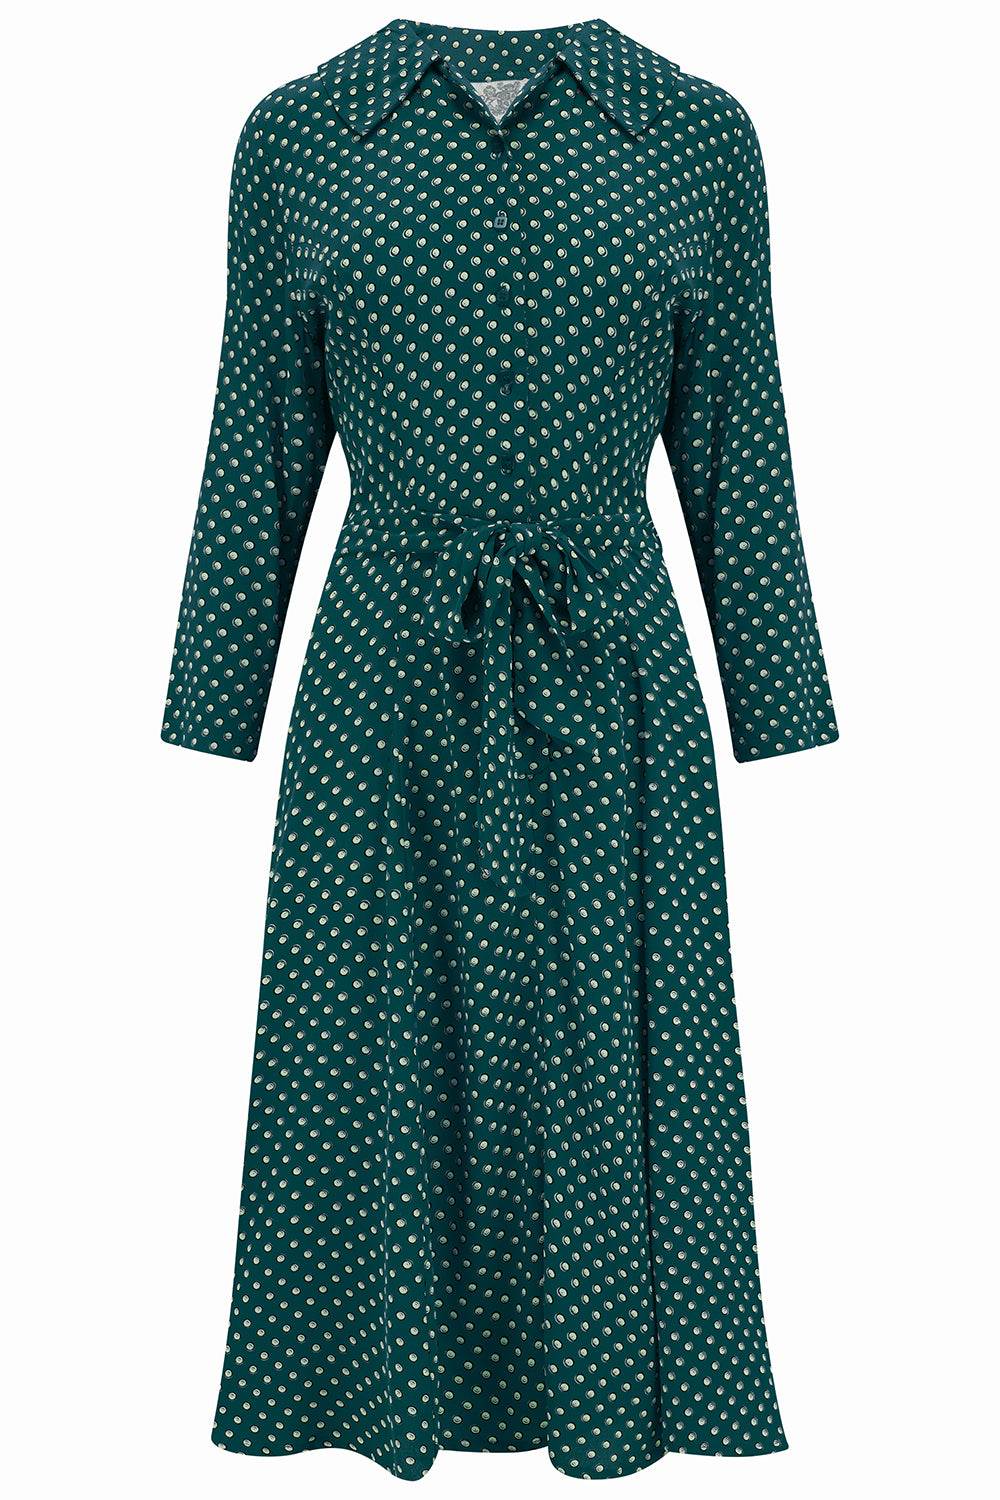 Violet dress in Green Ditzy , A Classic 1940s Inspired Day dress, True Vintage Style - True and authentic vintage style clothing, inspired by the Classic styles of CC41 , WW2 and the fun 1950s RocknRoll era, for everyday wear plus events like Goodwood Revival, Twinwood Festival and Viva Las Vegas Rockabilly Weekend Rock n Romance The Seamstress of Bloomsbury